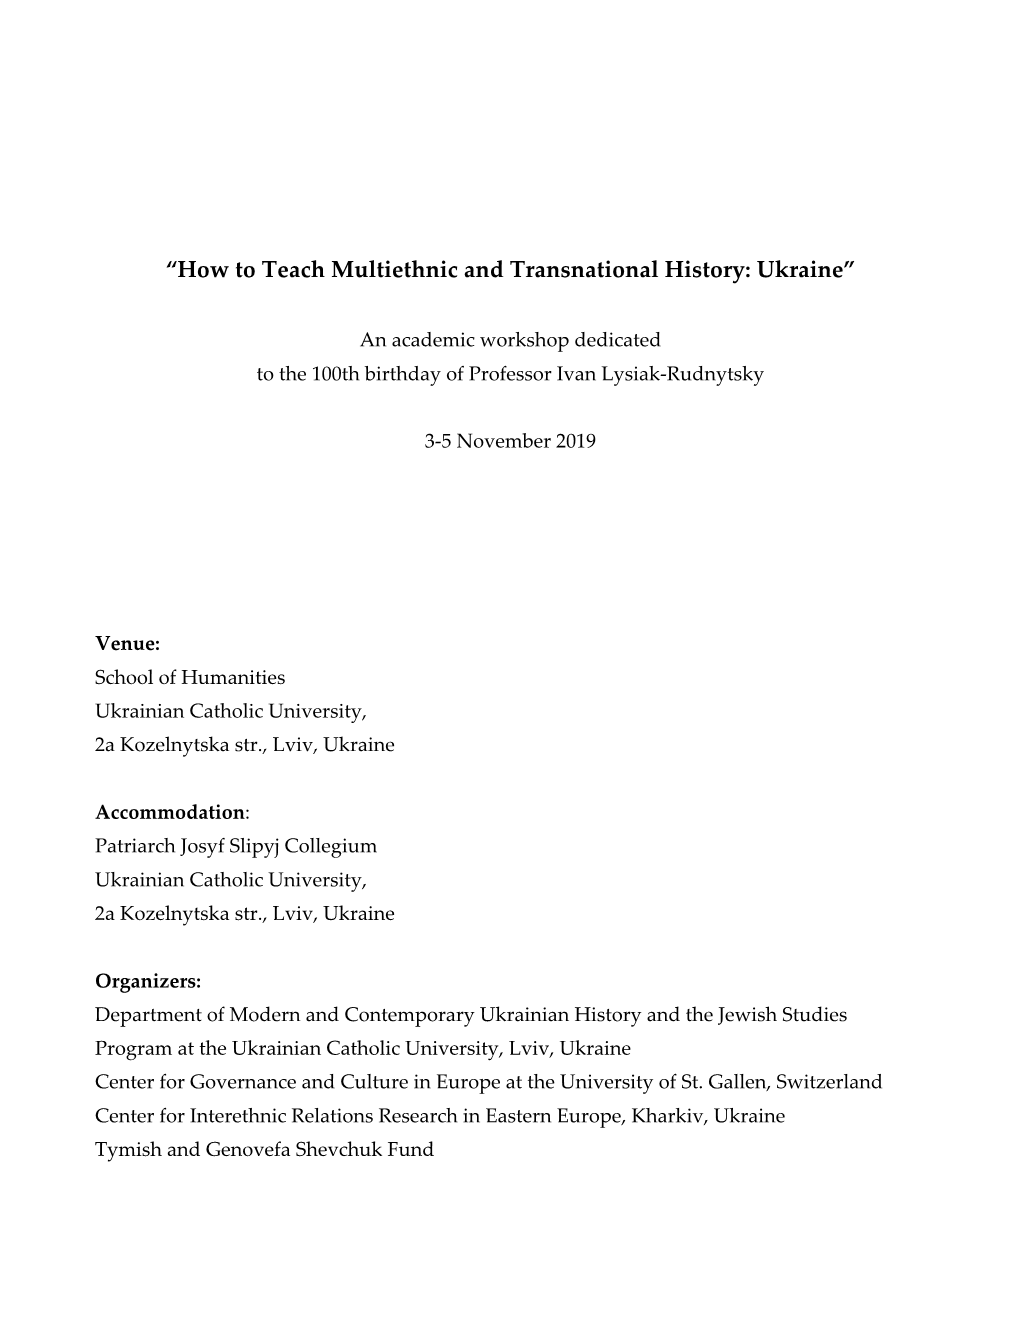 “How to Teach Multiethnic and Transnational History: Ukraine”